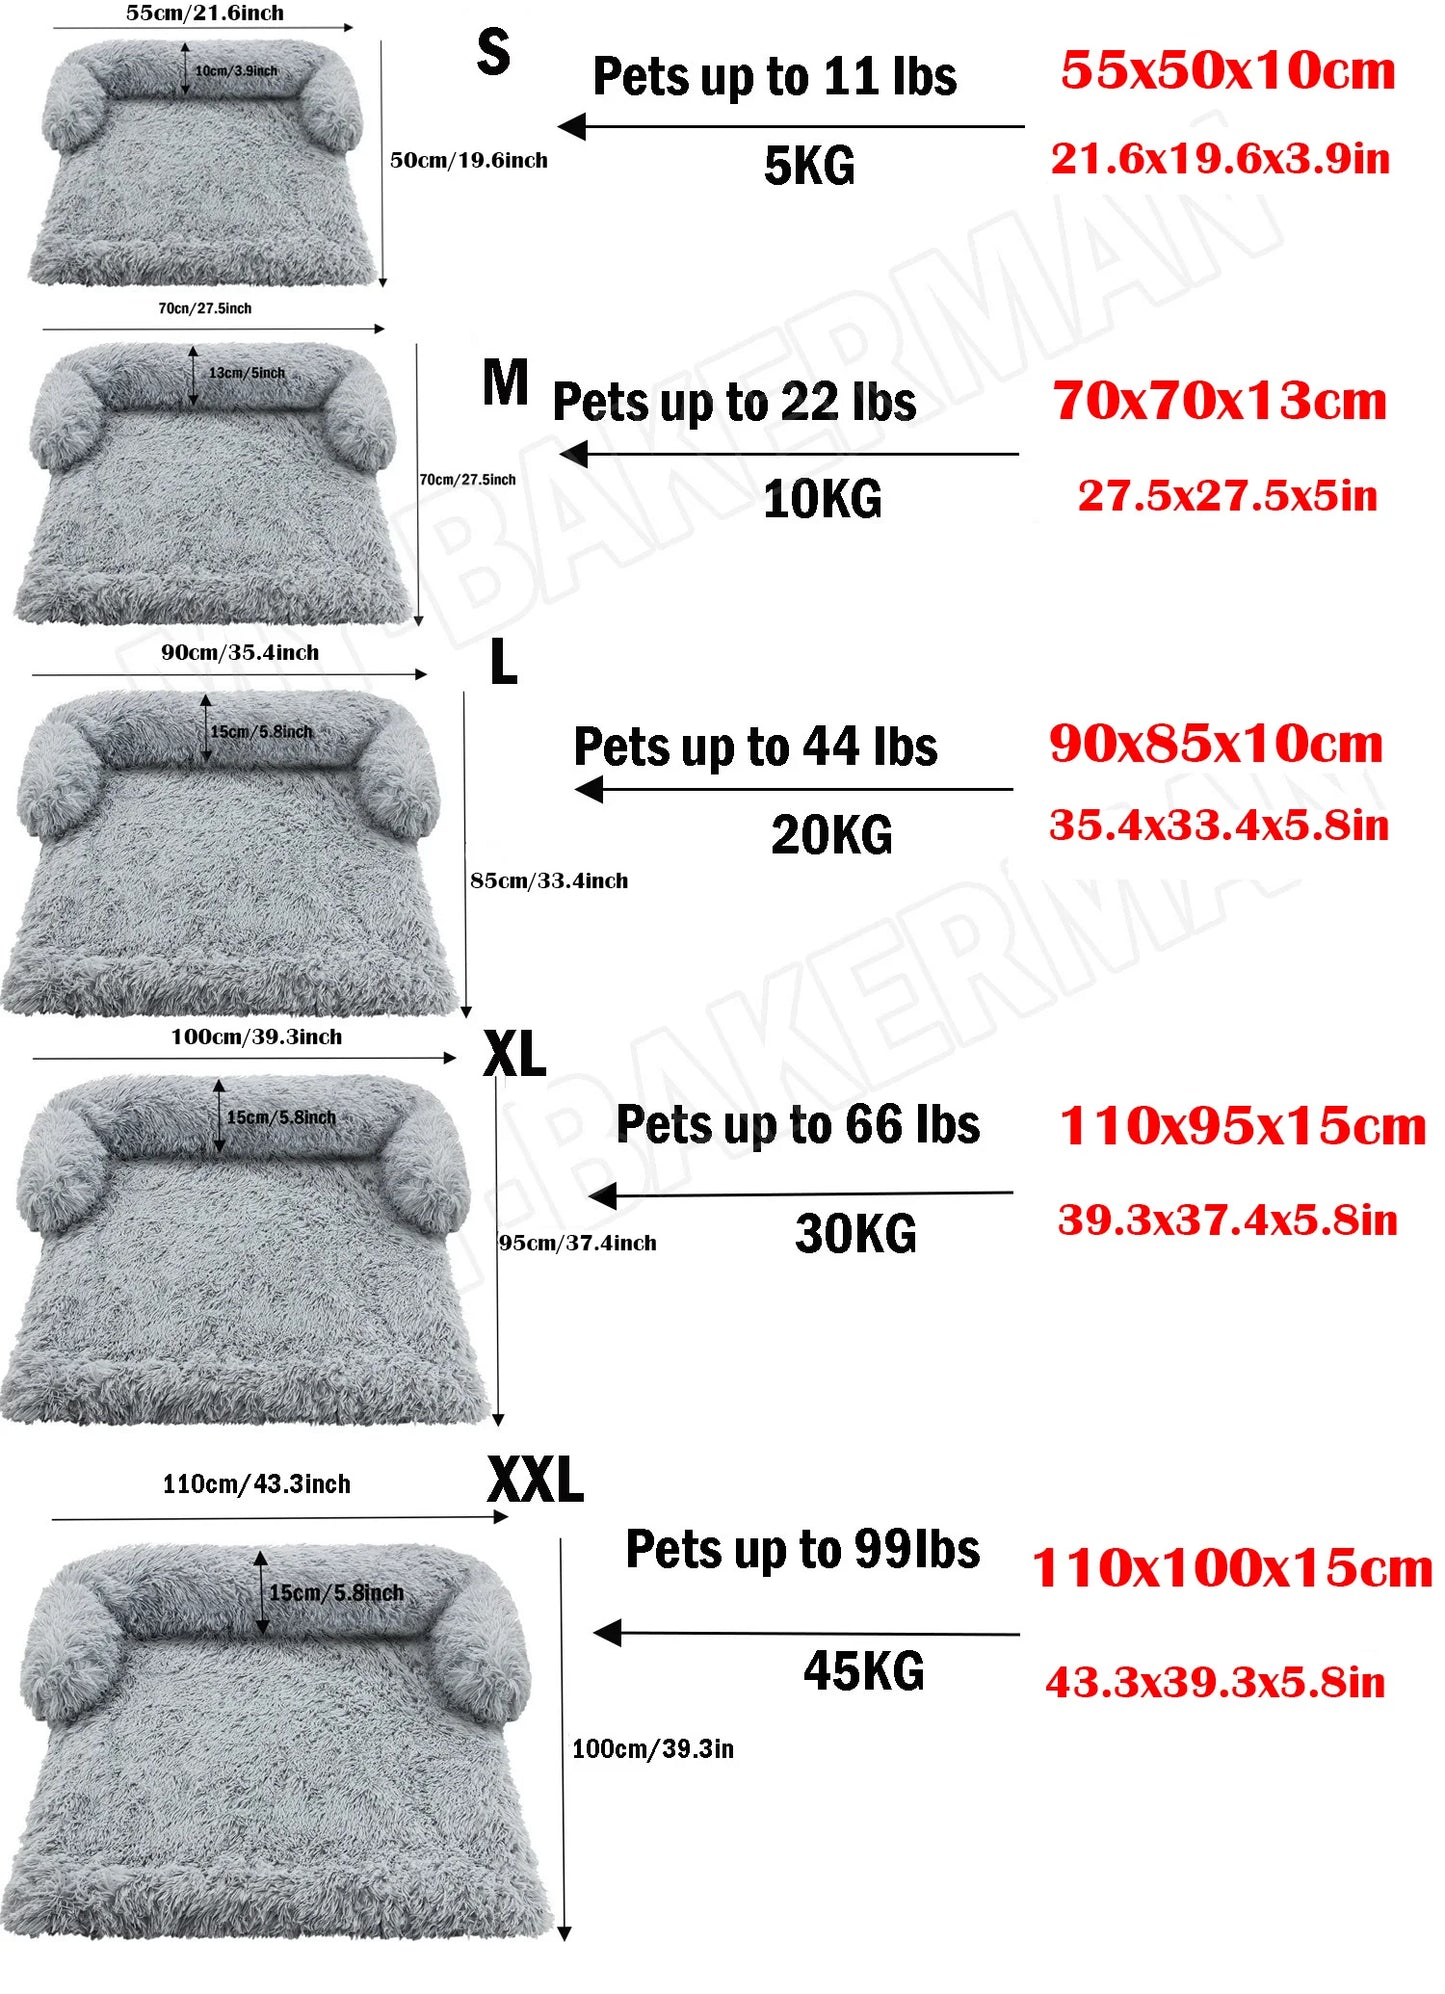 Washable Pet Sofa Dog Bed Calming Bed For Large Dogs Sofa Blanket Winter Warm Cat Bed Mat Couches Car Floor Furniture Protector